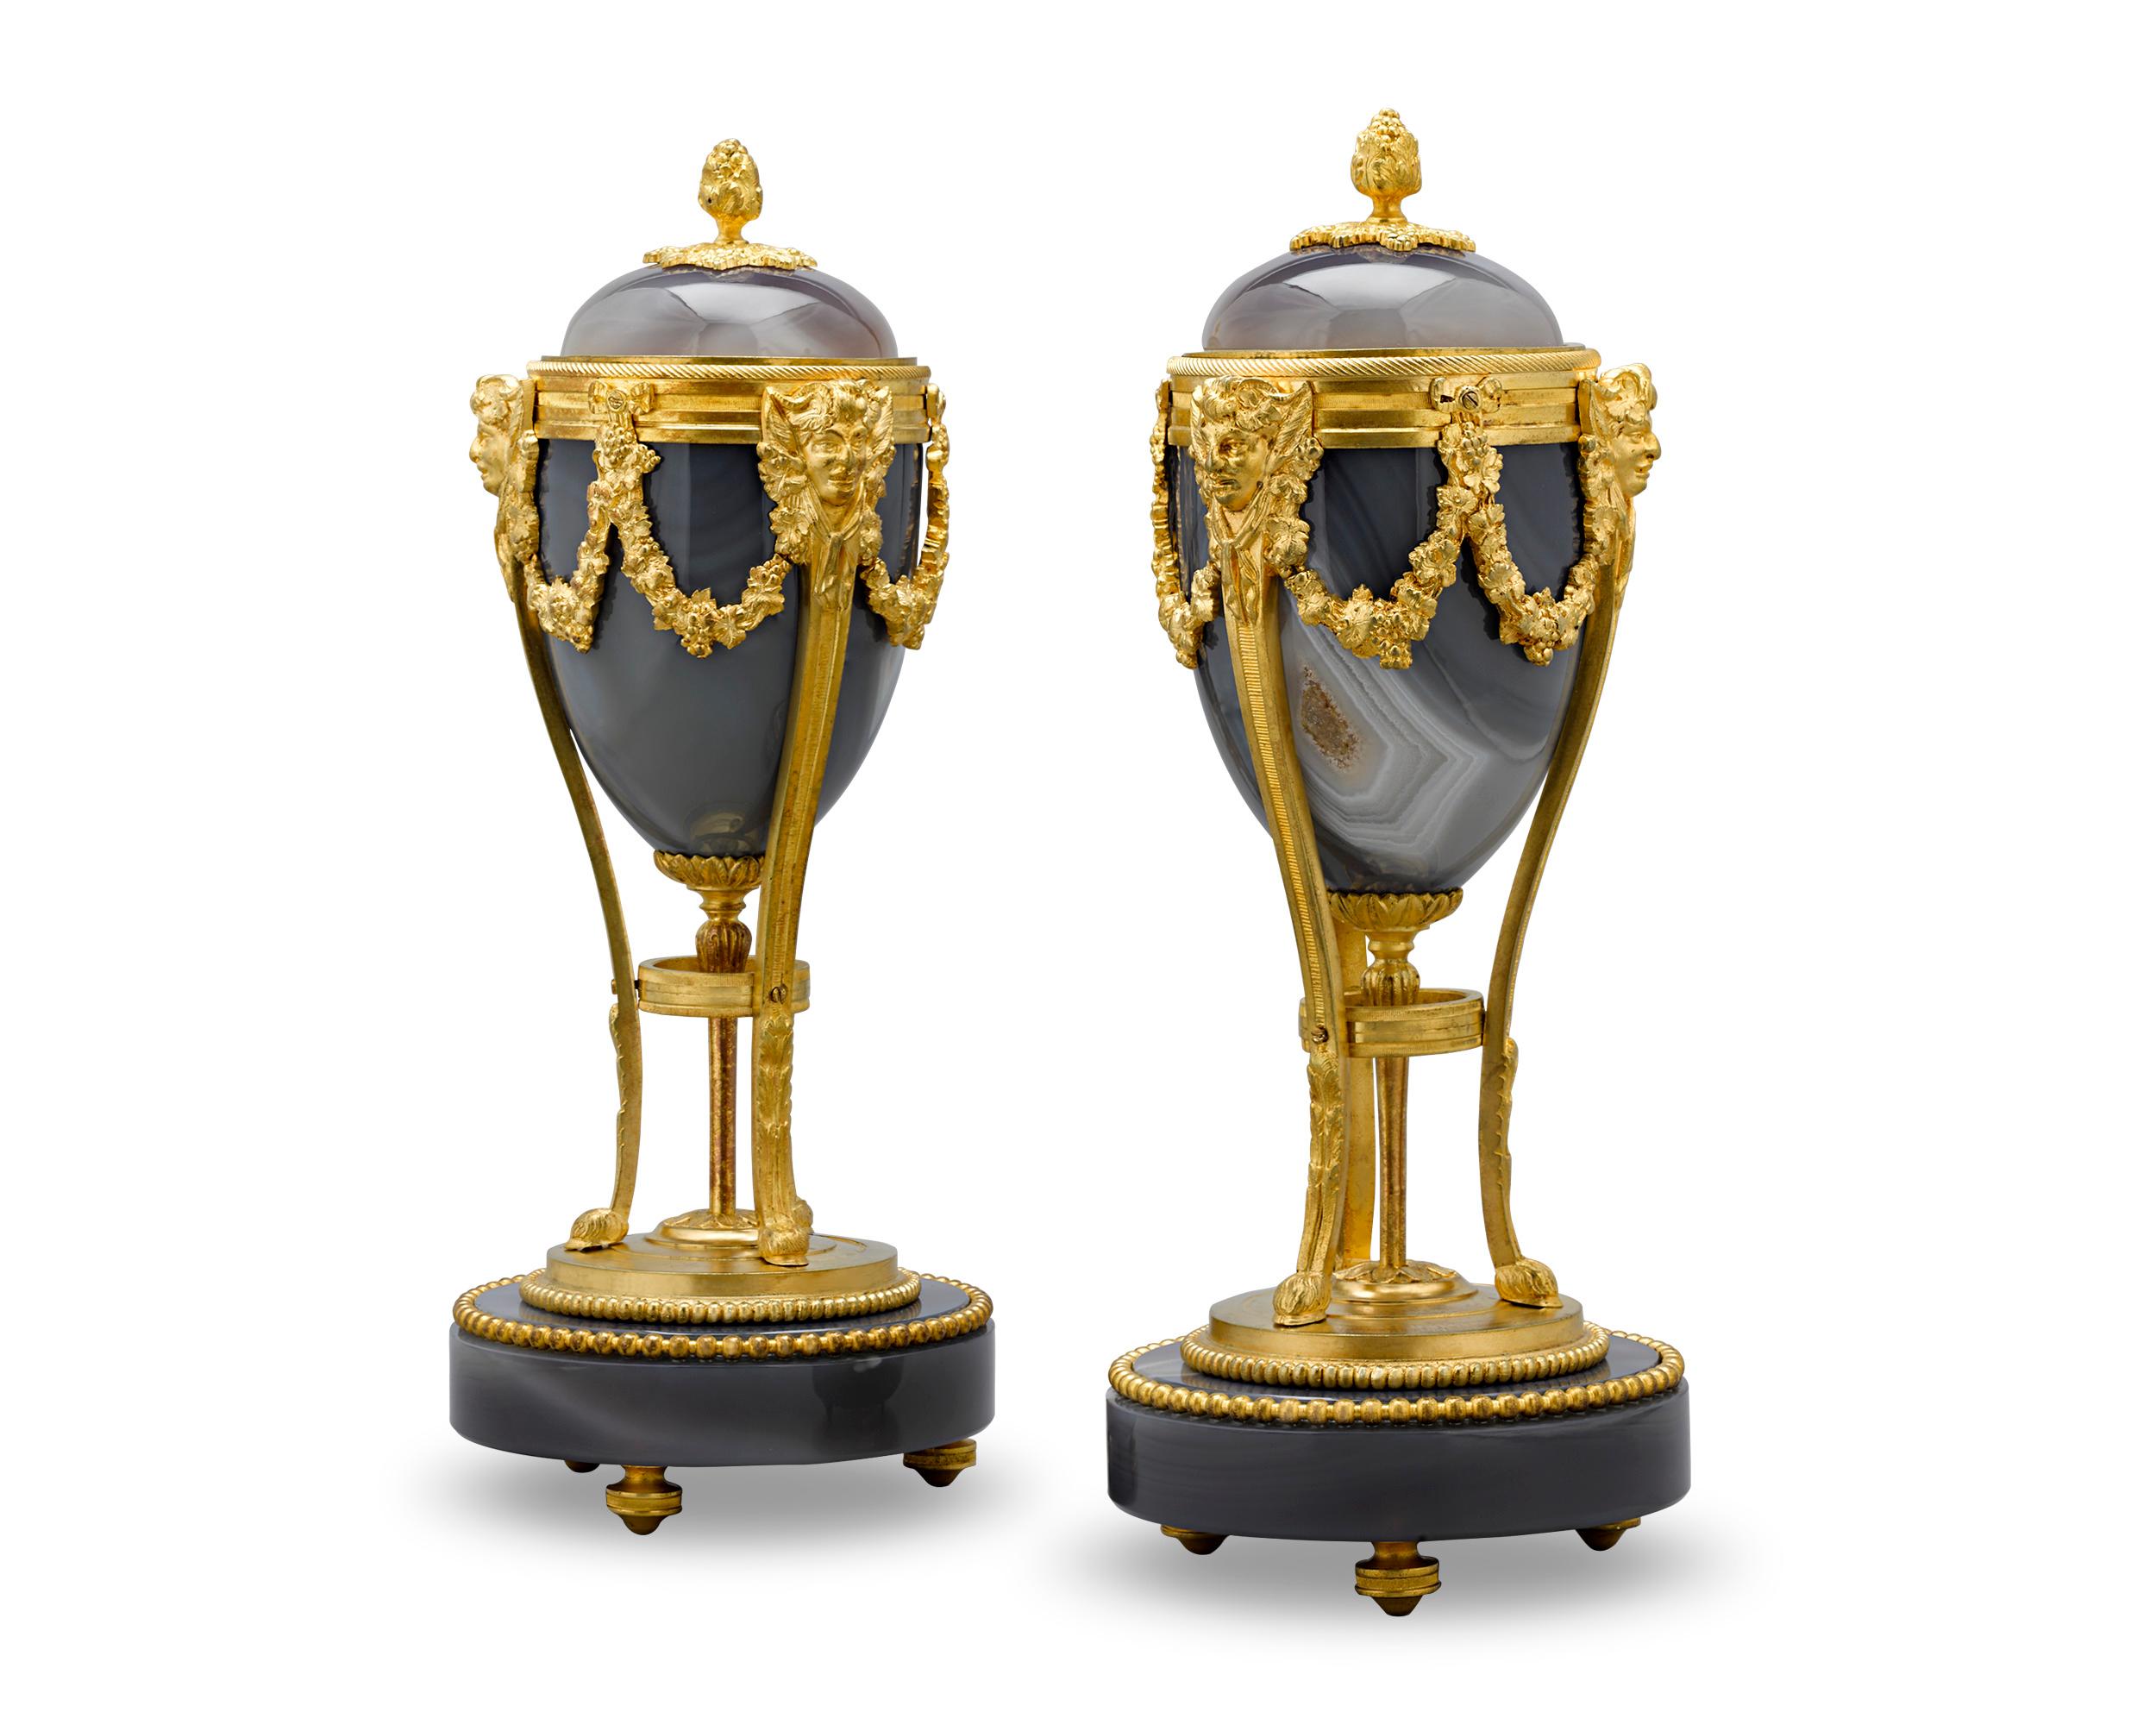 The bodies of this pair of Louis XVI-style cassolettes are formed from stunning examples of chalcedony. Their graceful design showcases the qualities for which this mineral is so loved, from its radiating crystalline structure to its rich shades of